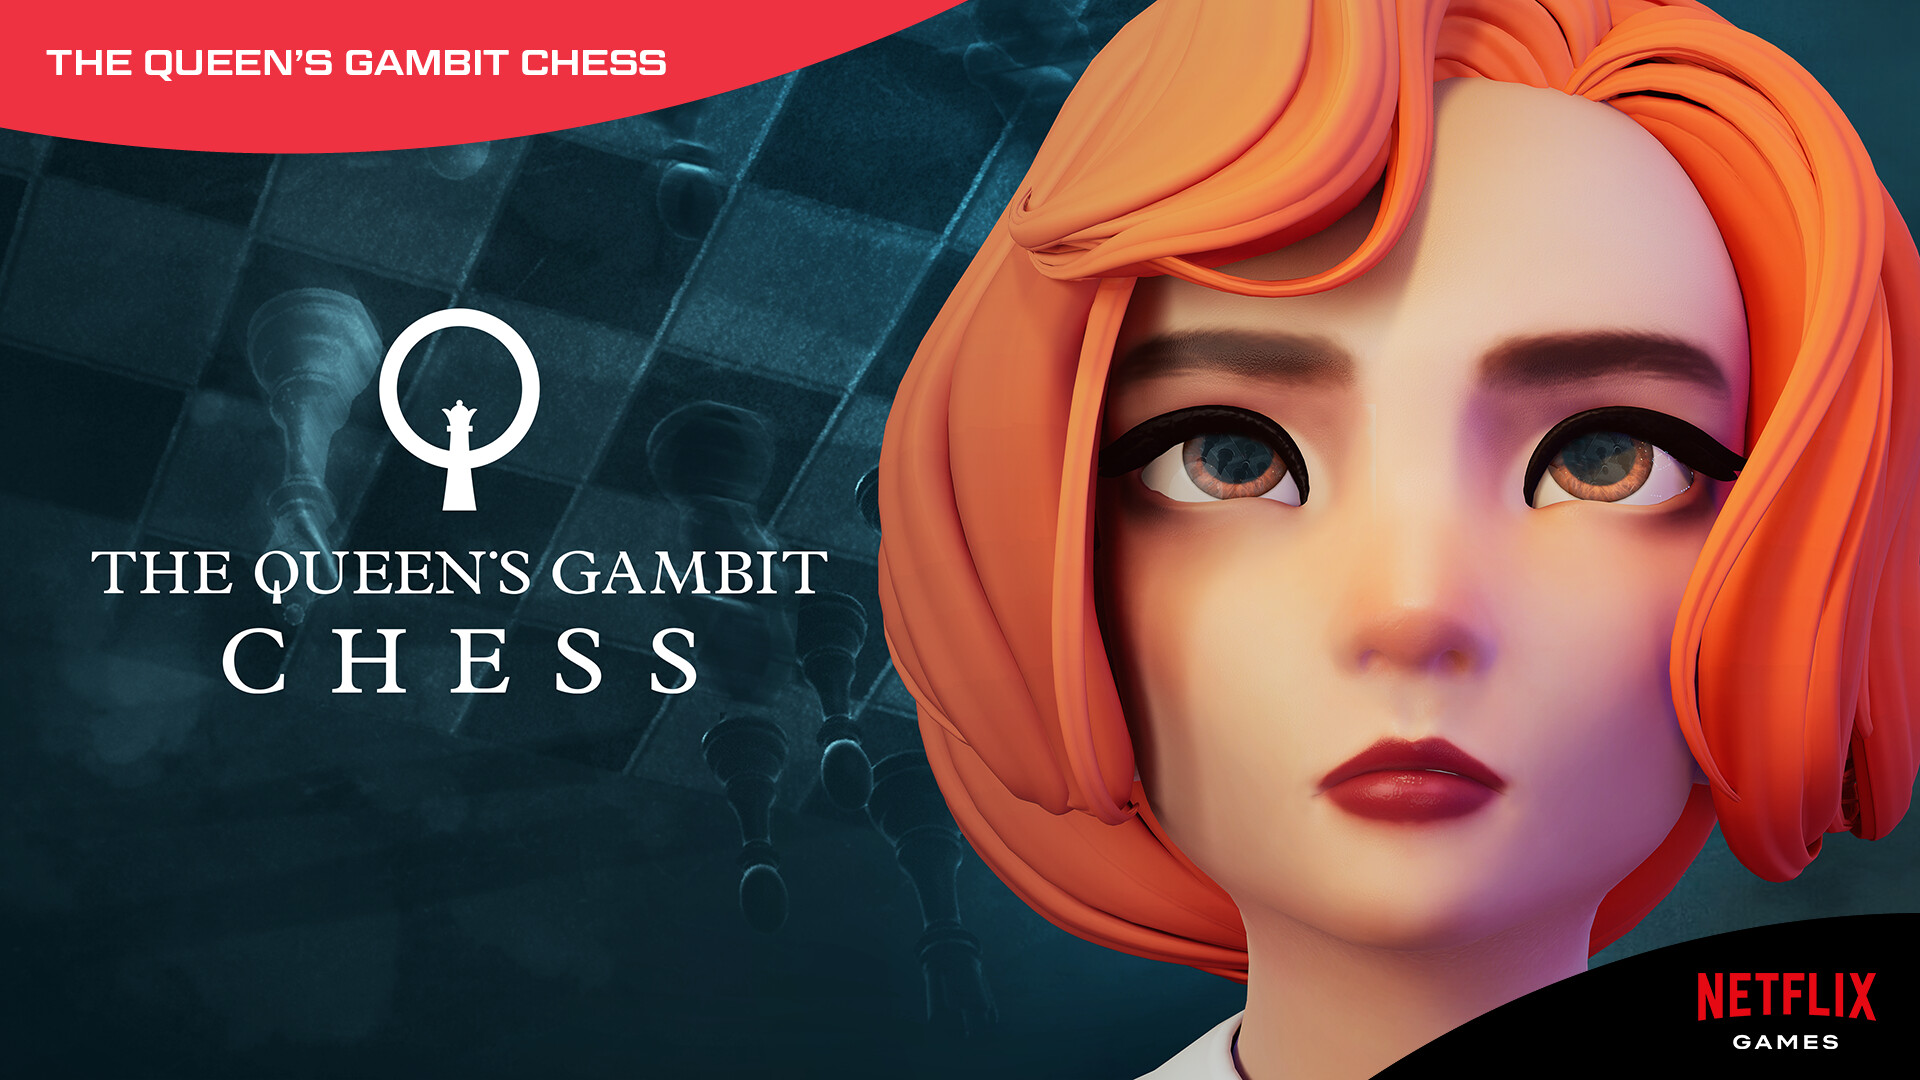 The Story Behind Beth Harmon's Red Hair in “The Queen's Gambit”